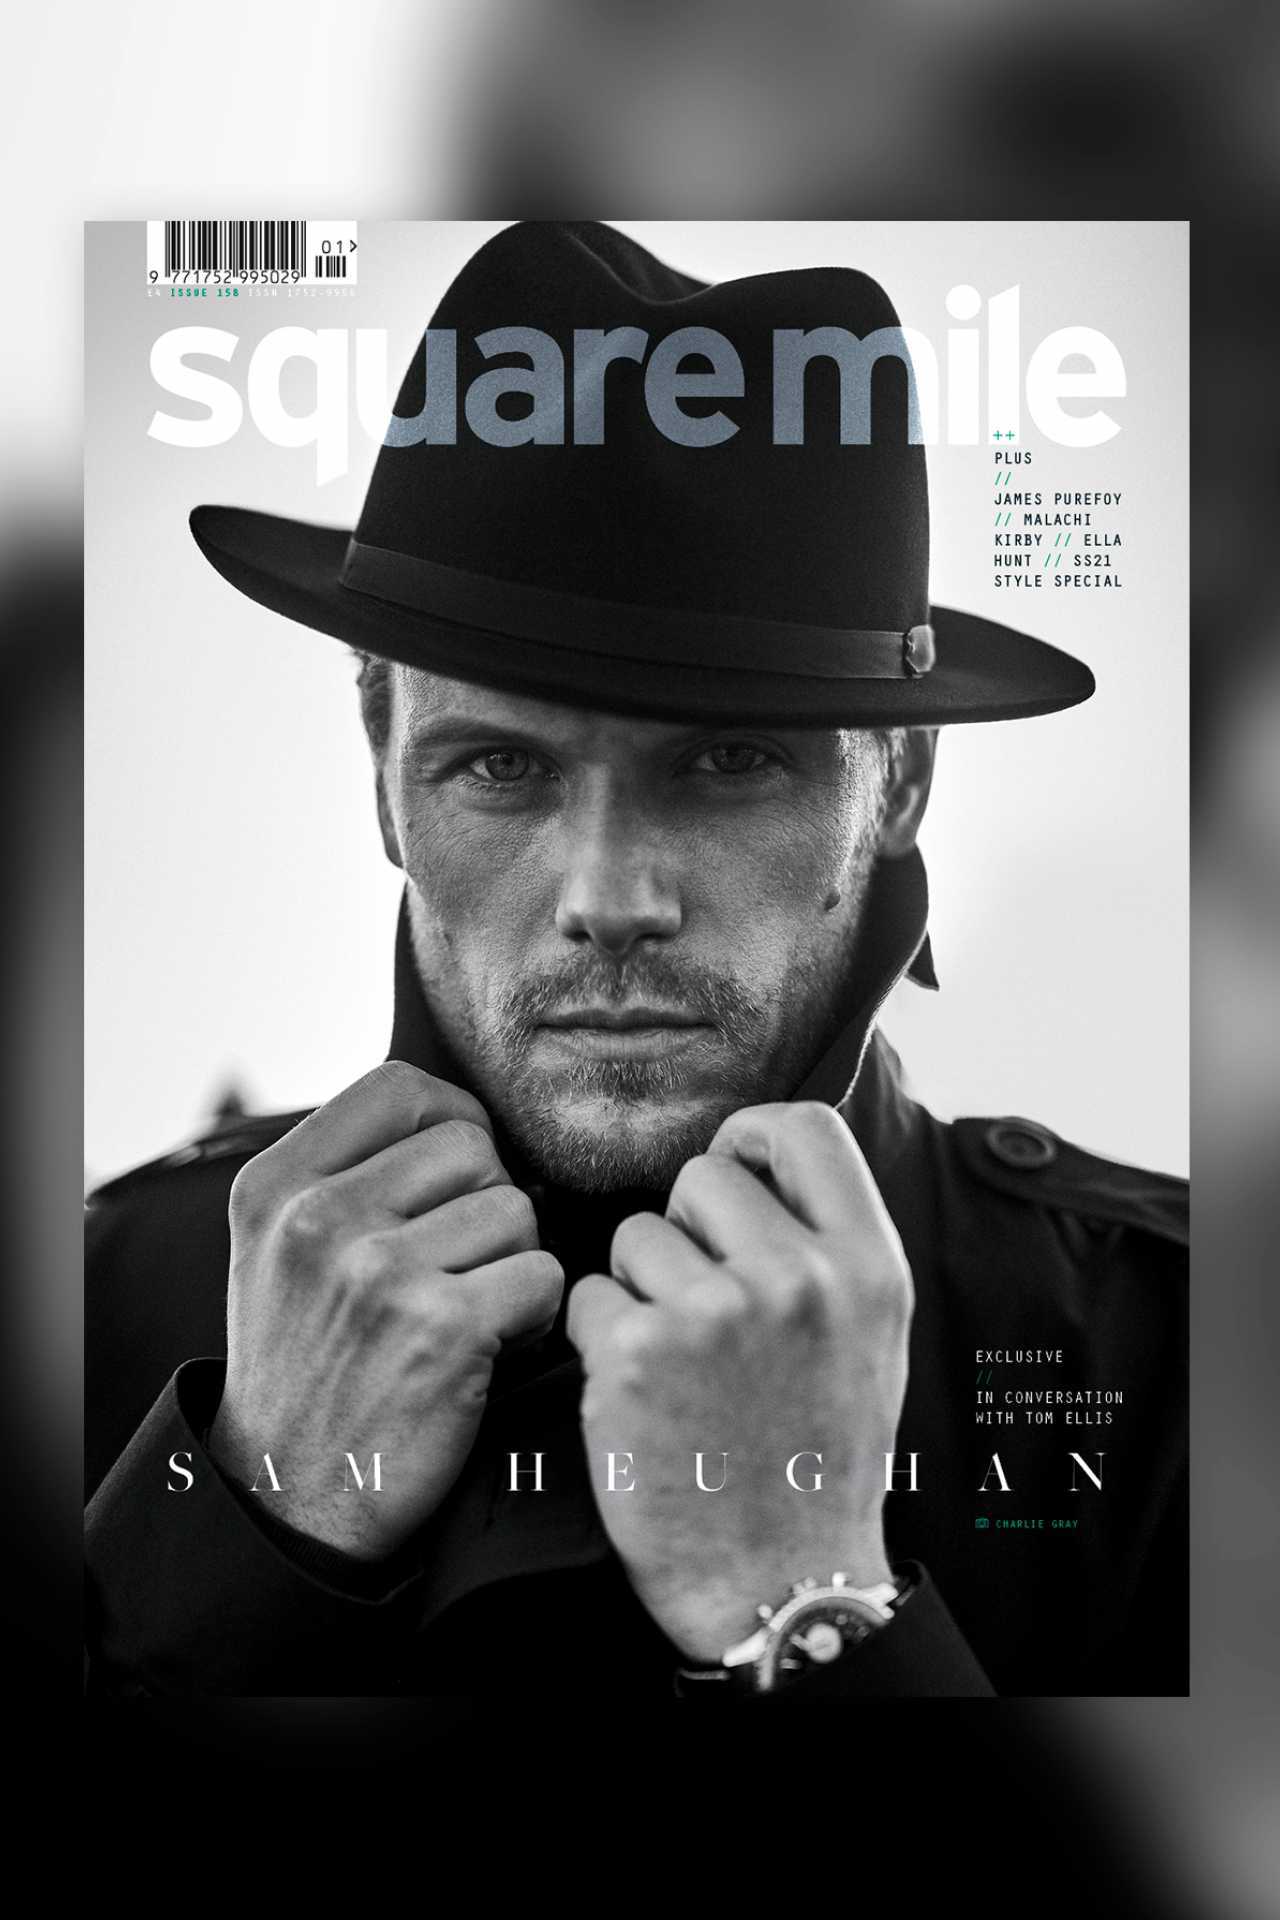 Sam Heughan photographed by Charlie Gray for Square Mile magazine